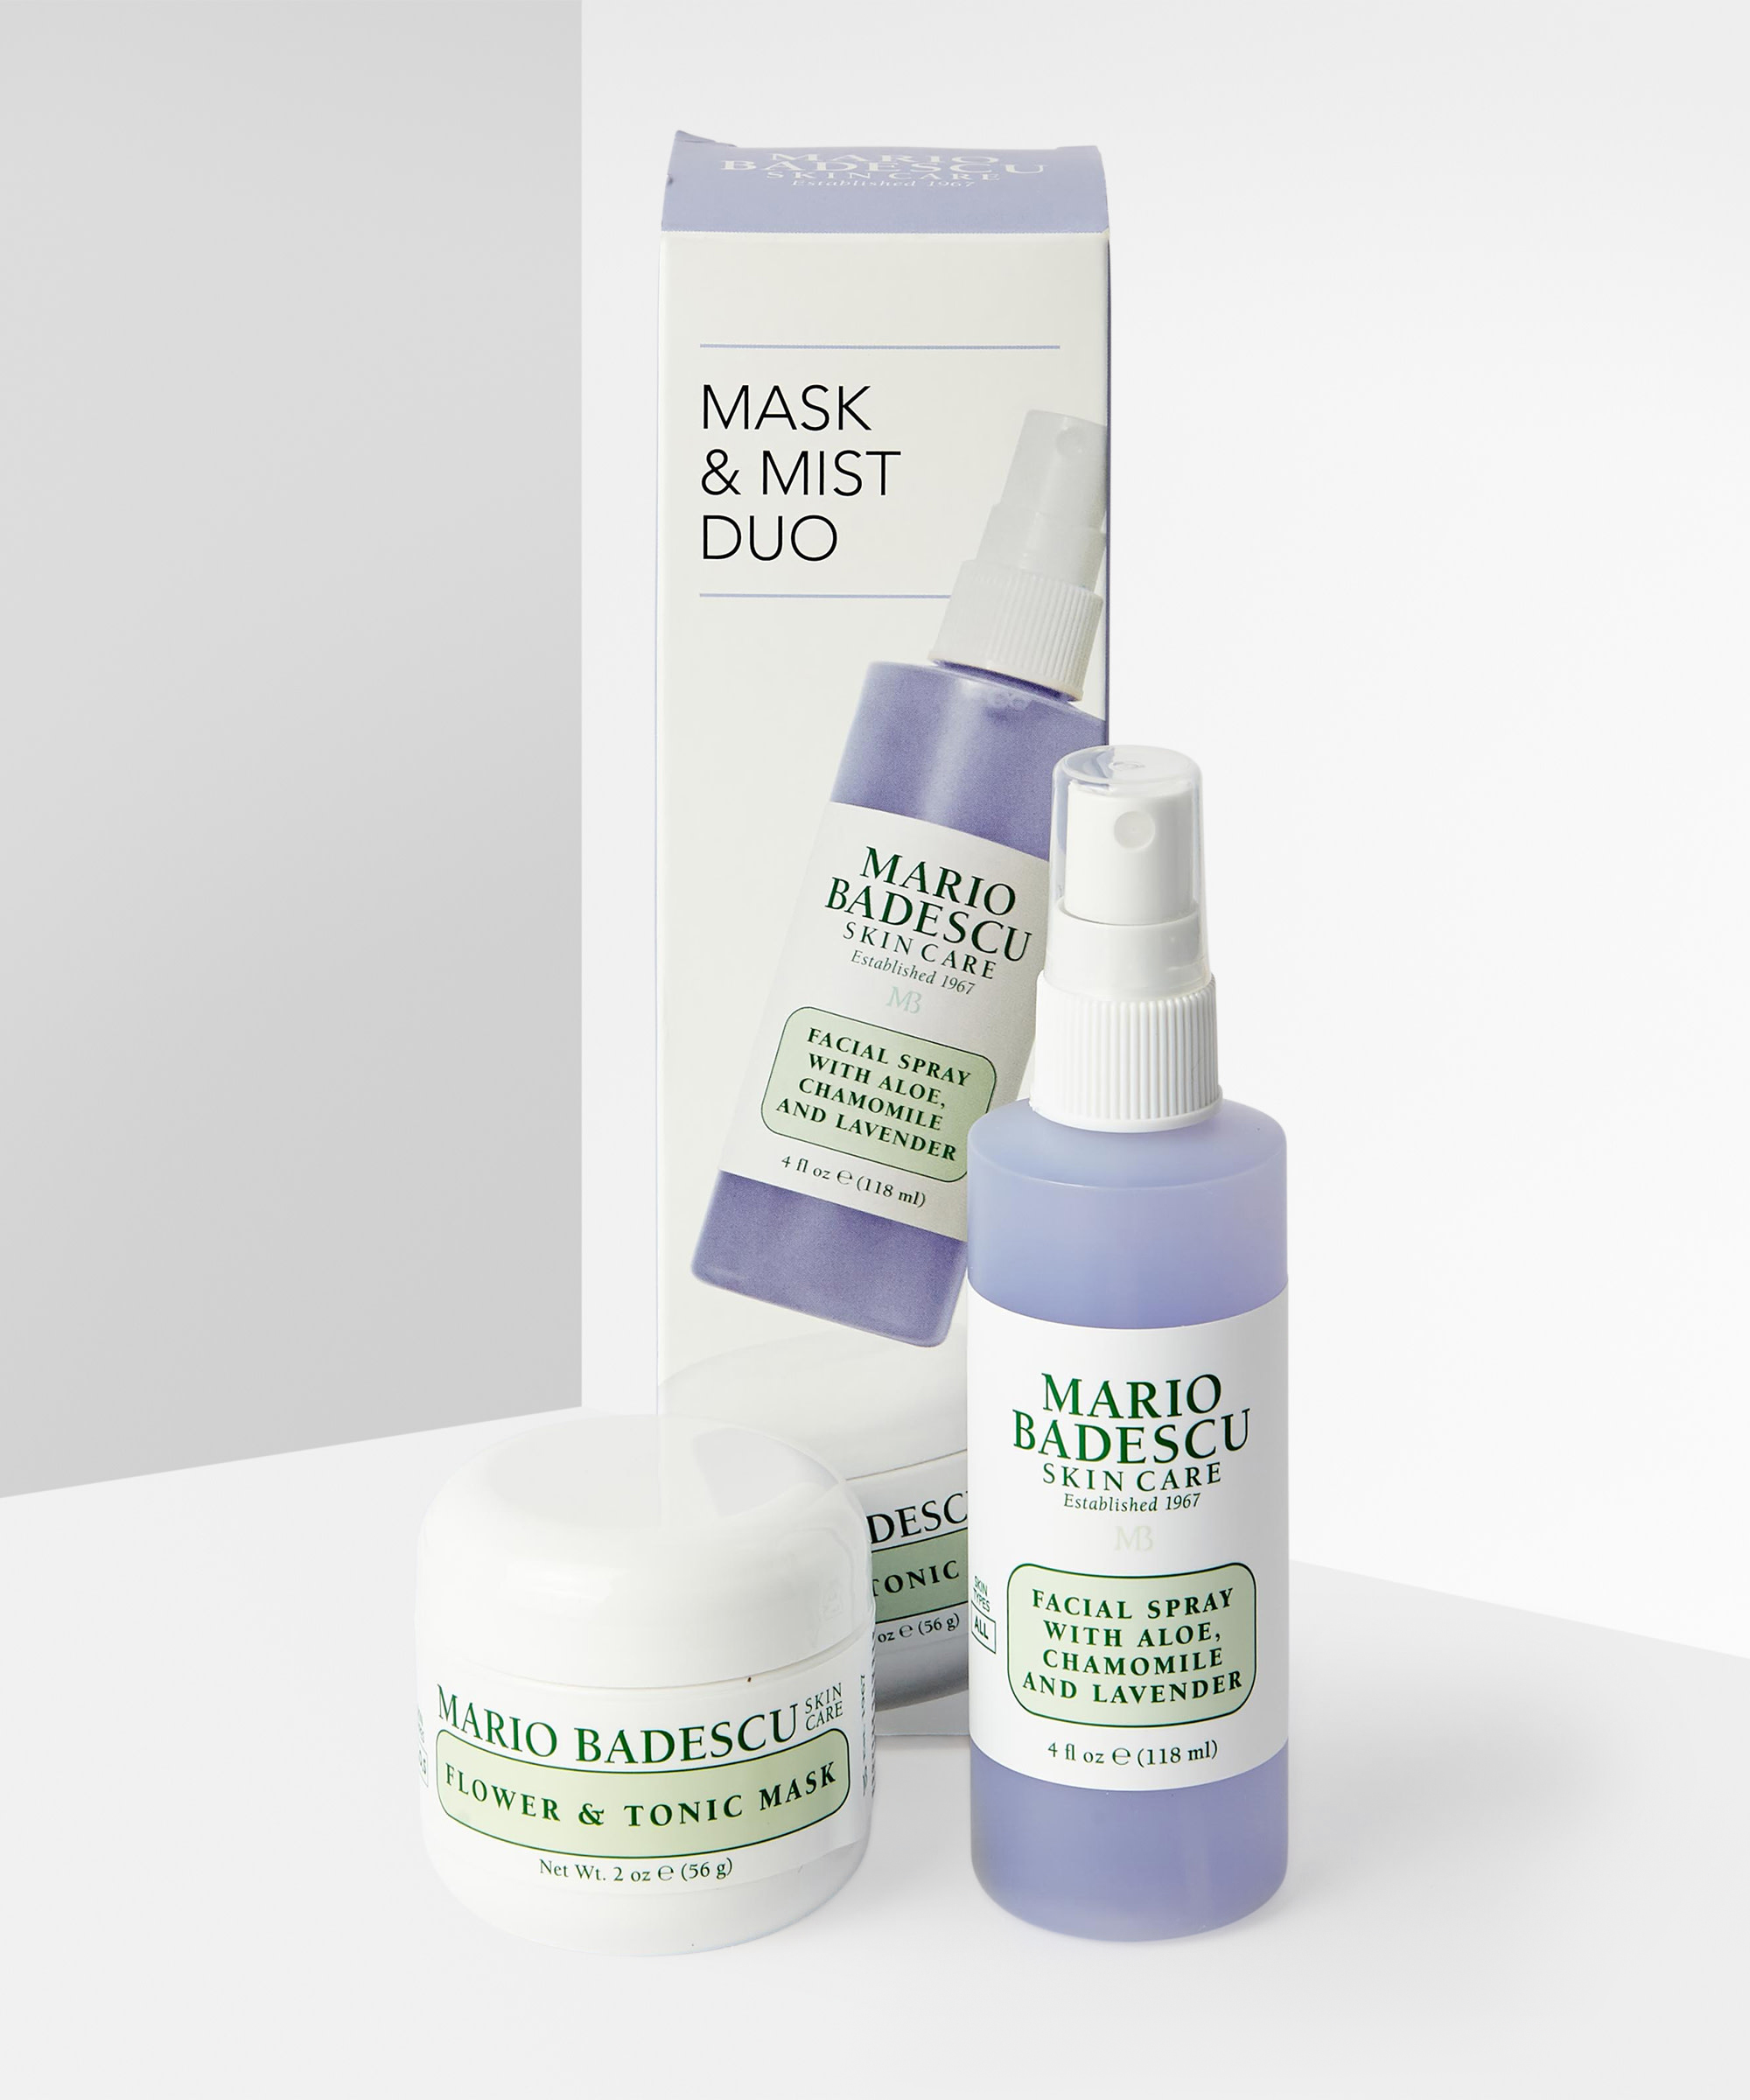 NEW Mario Badescu Bundle Gift Set - Facial Spray, Masks, Eye Cream, Dry  Patches Oultet Website, 59% OFF | mail.esemontenegro.gov.co